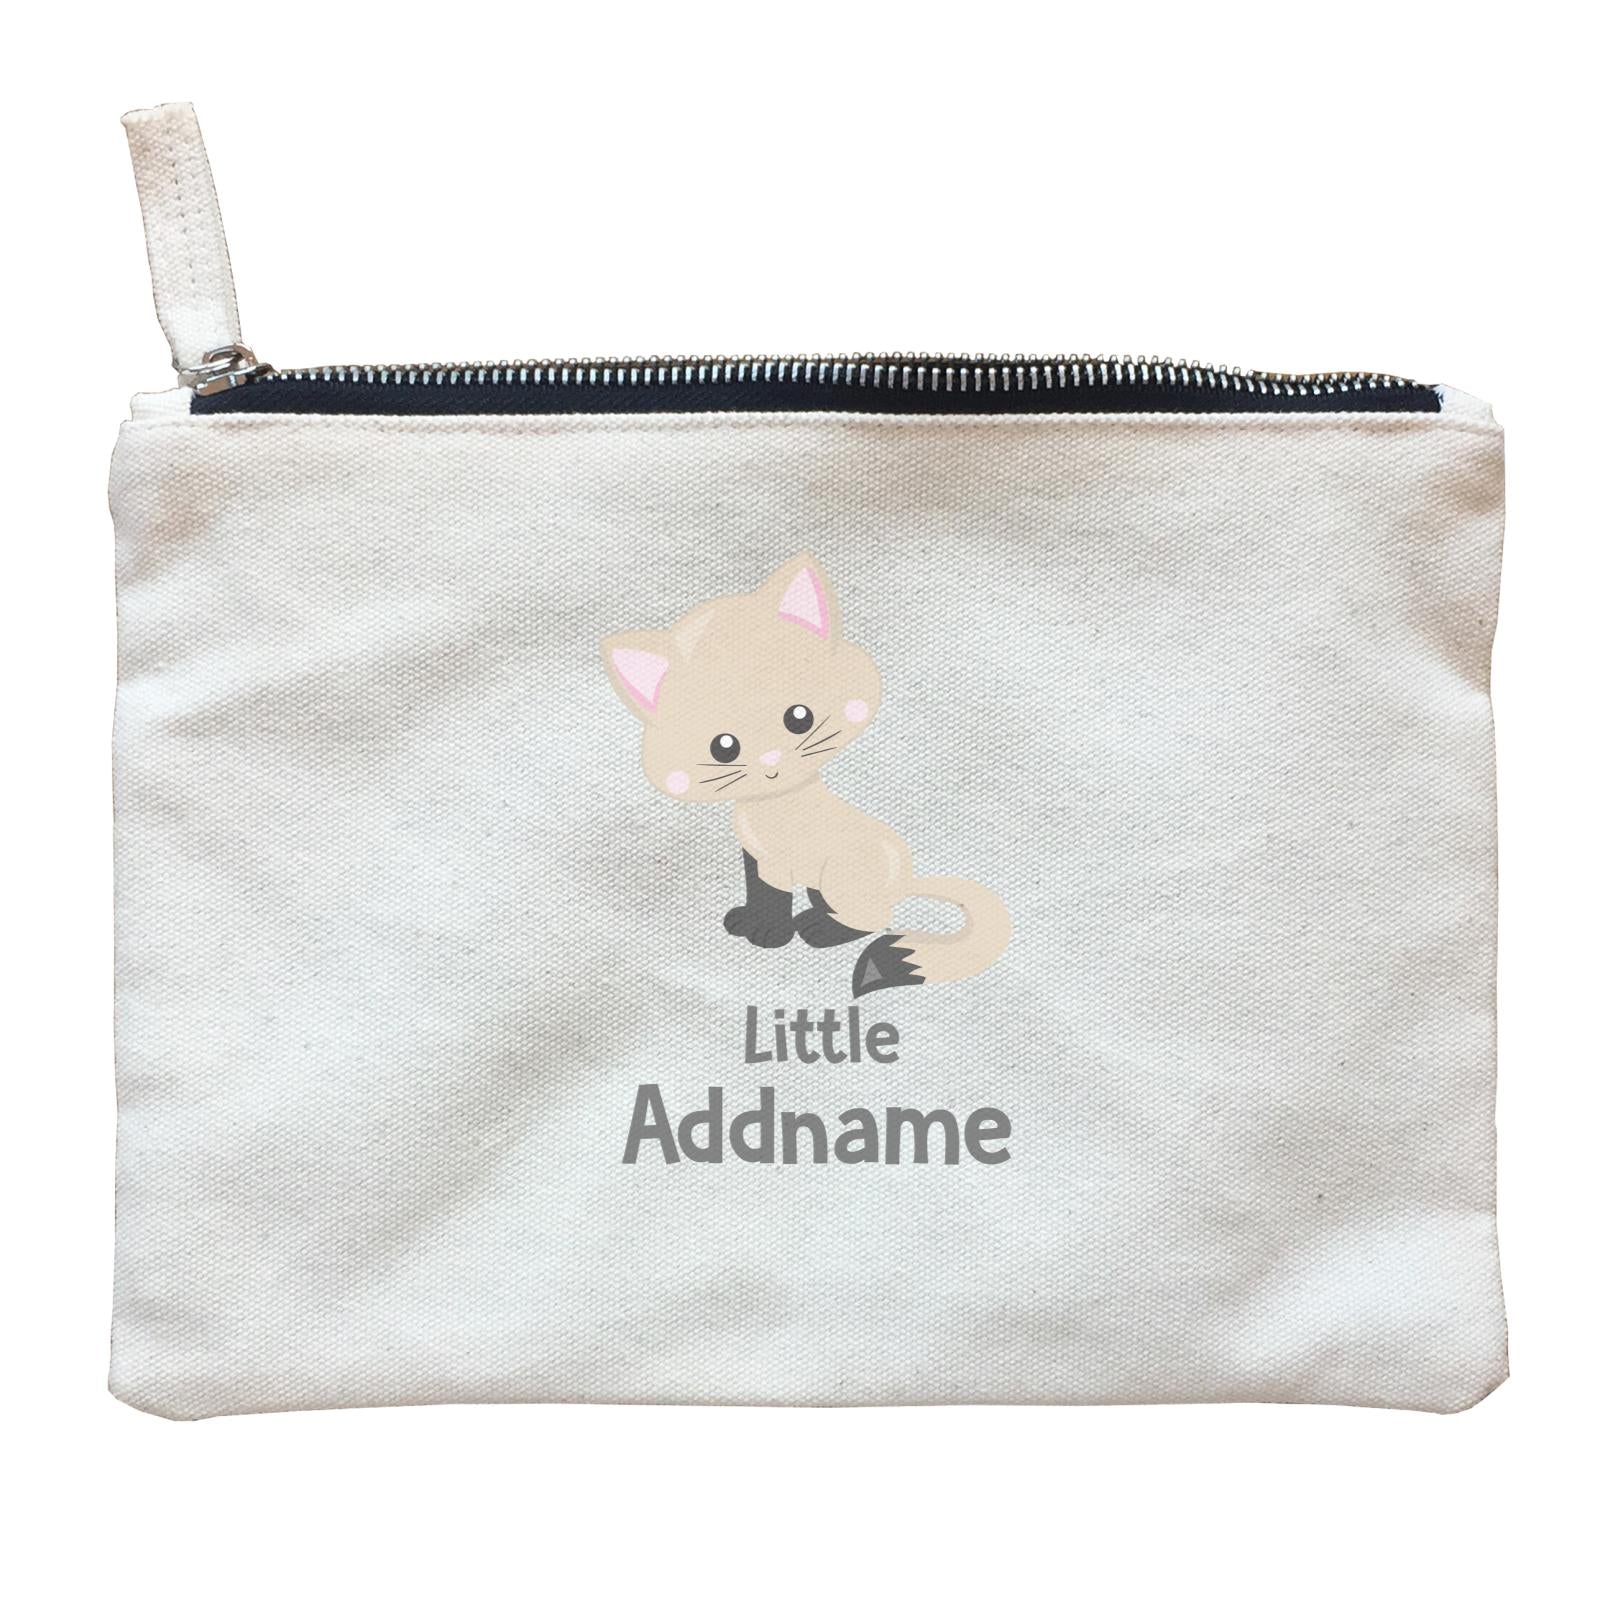 Adorable Cats Light Brown Cat with Black Legs Little Addname Zipper Pouch